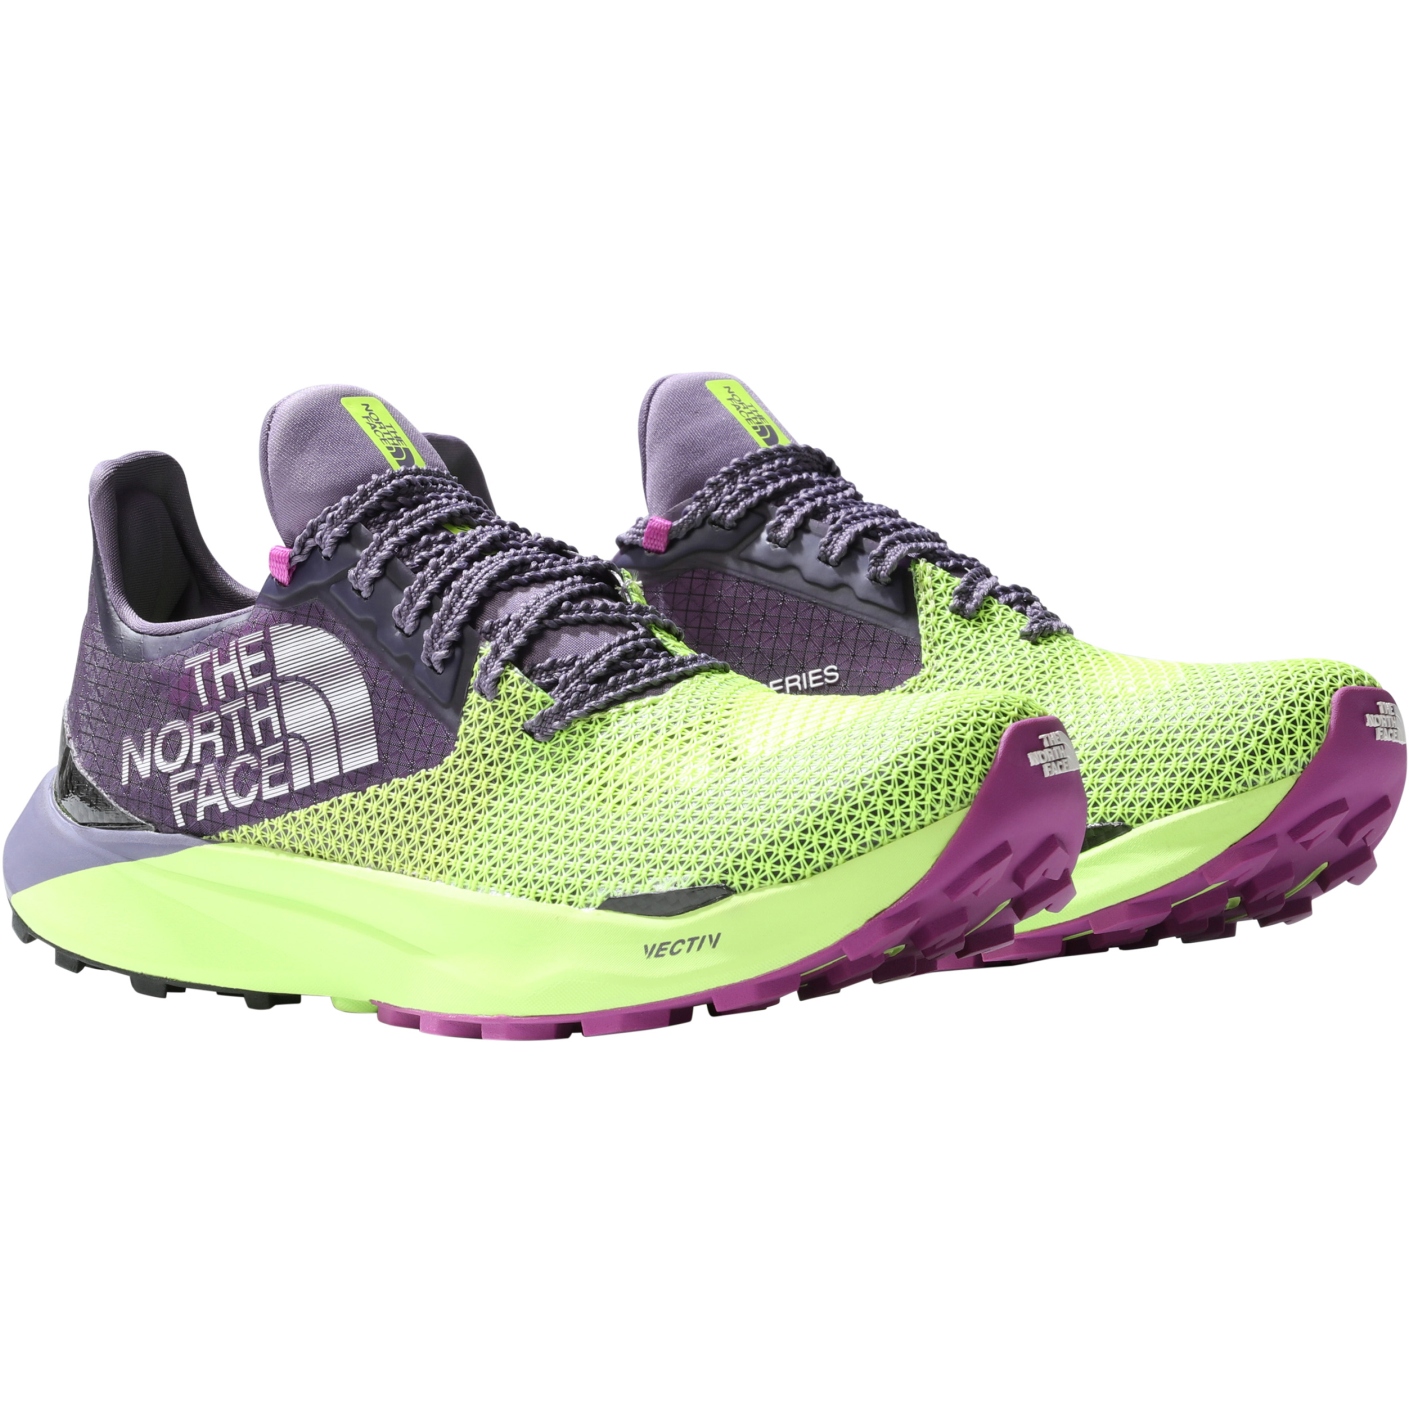 Productfoto van The North Face Summit VECTIV™ Sky Trail Hardloopschoenen Dames - LED Yellow/Lunar Slate